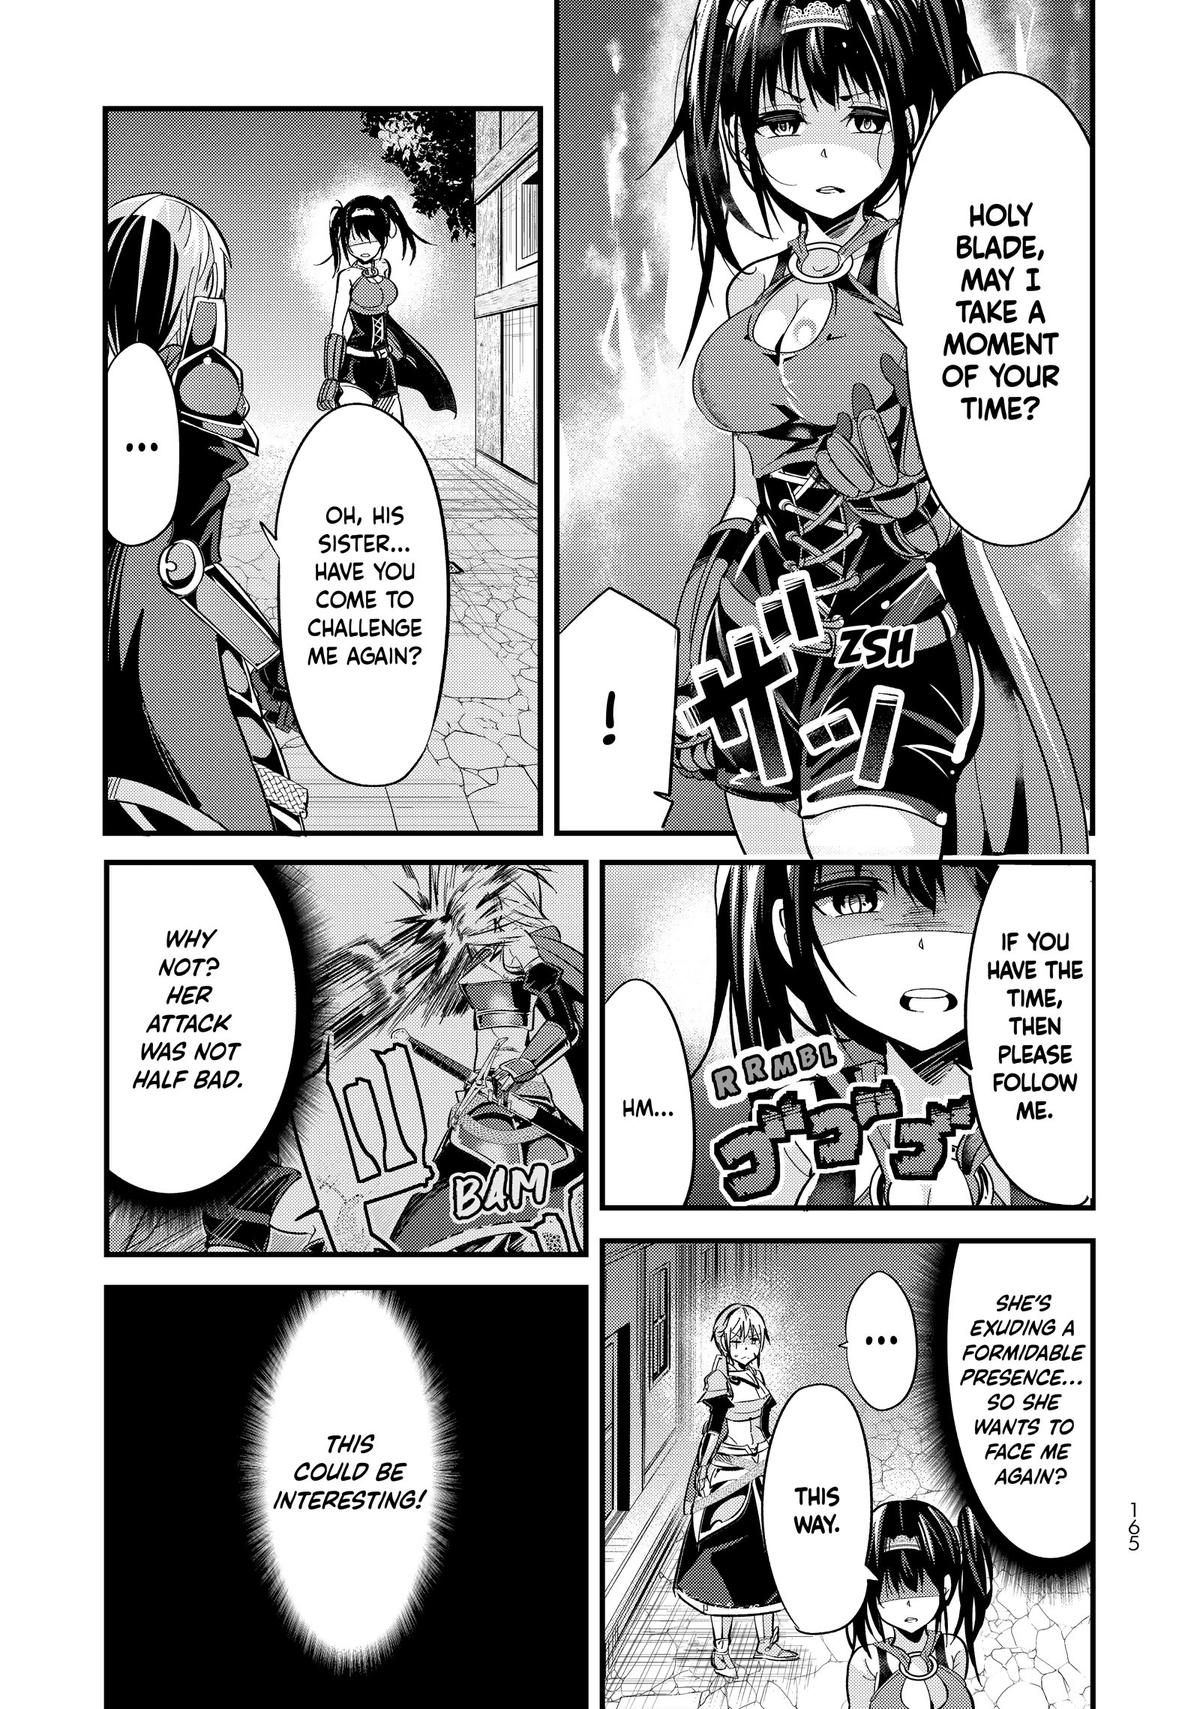 How to Treat a Lady Knight Right - Chapter 19 Read Manga Online